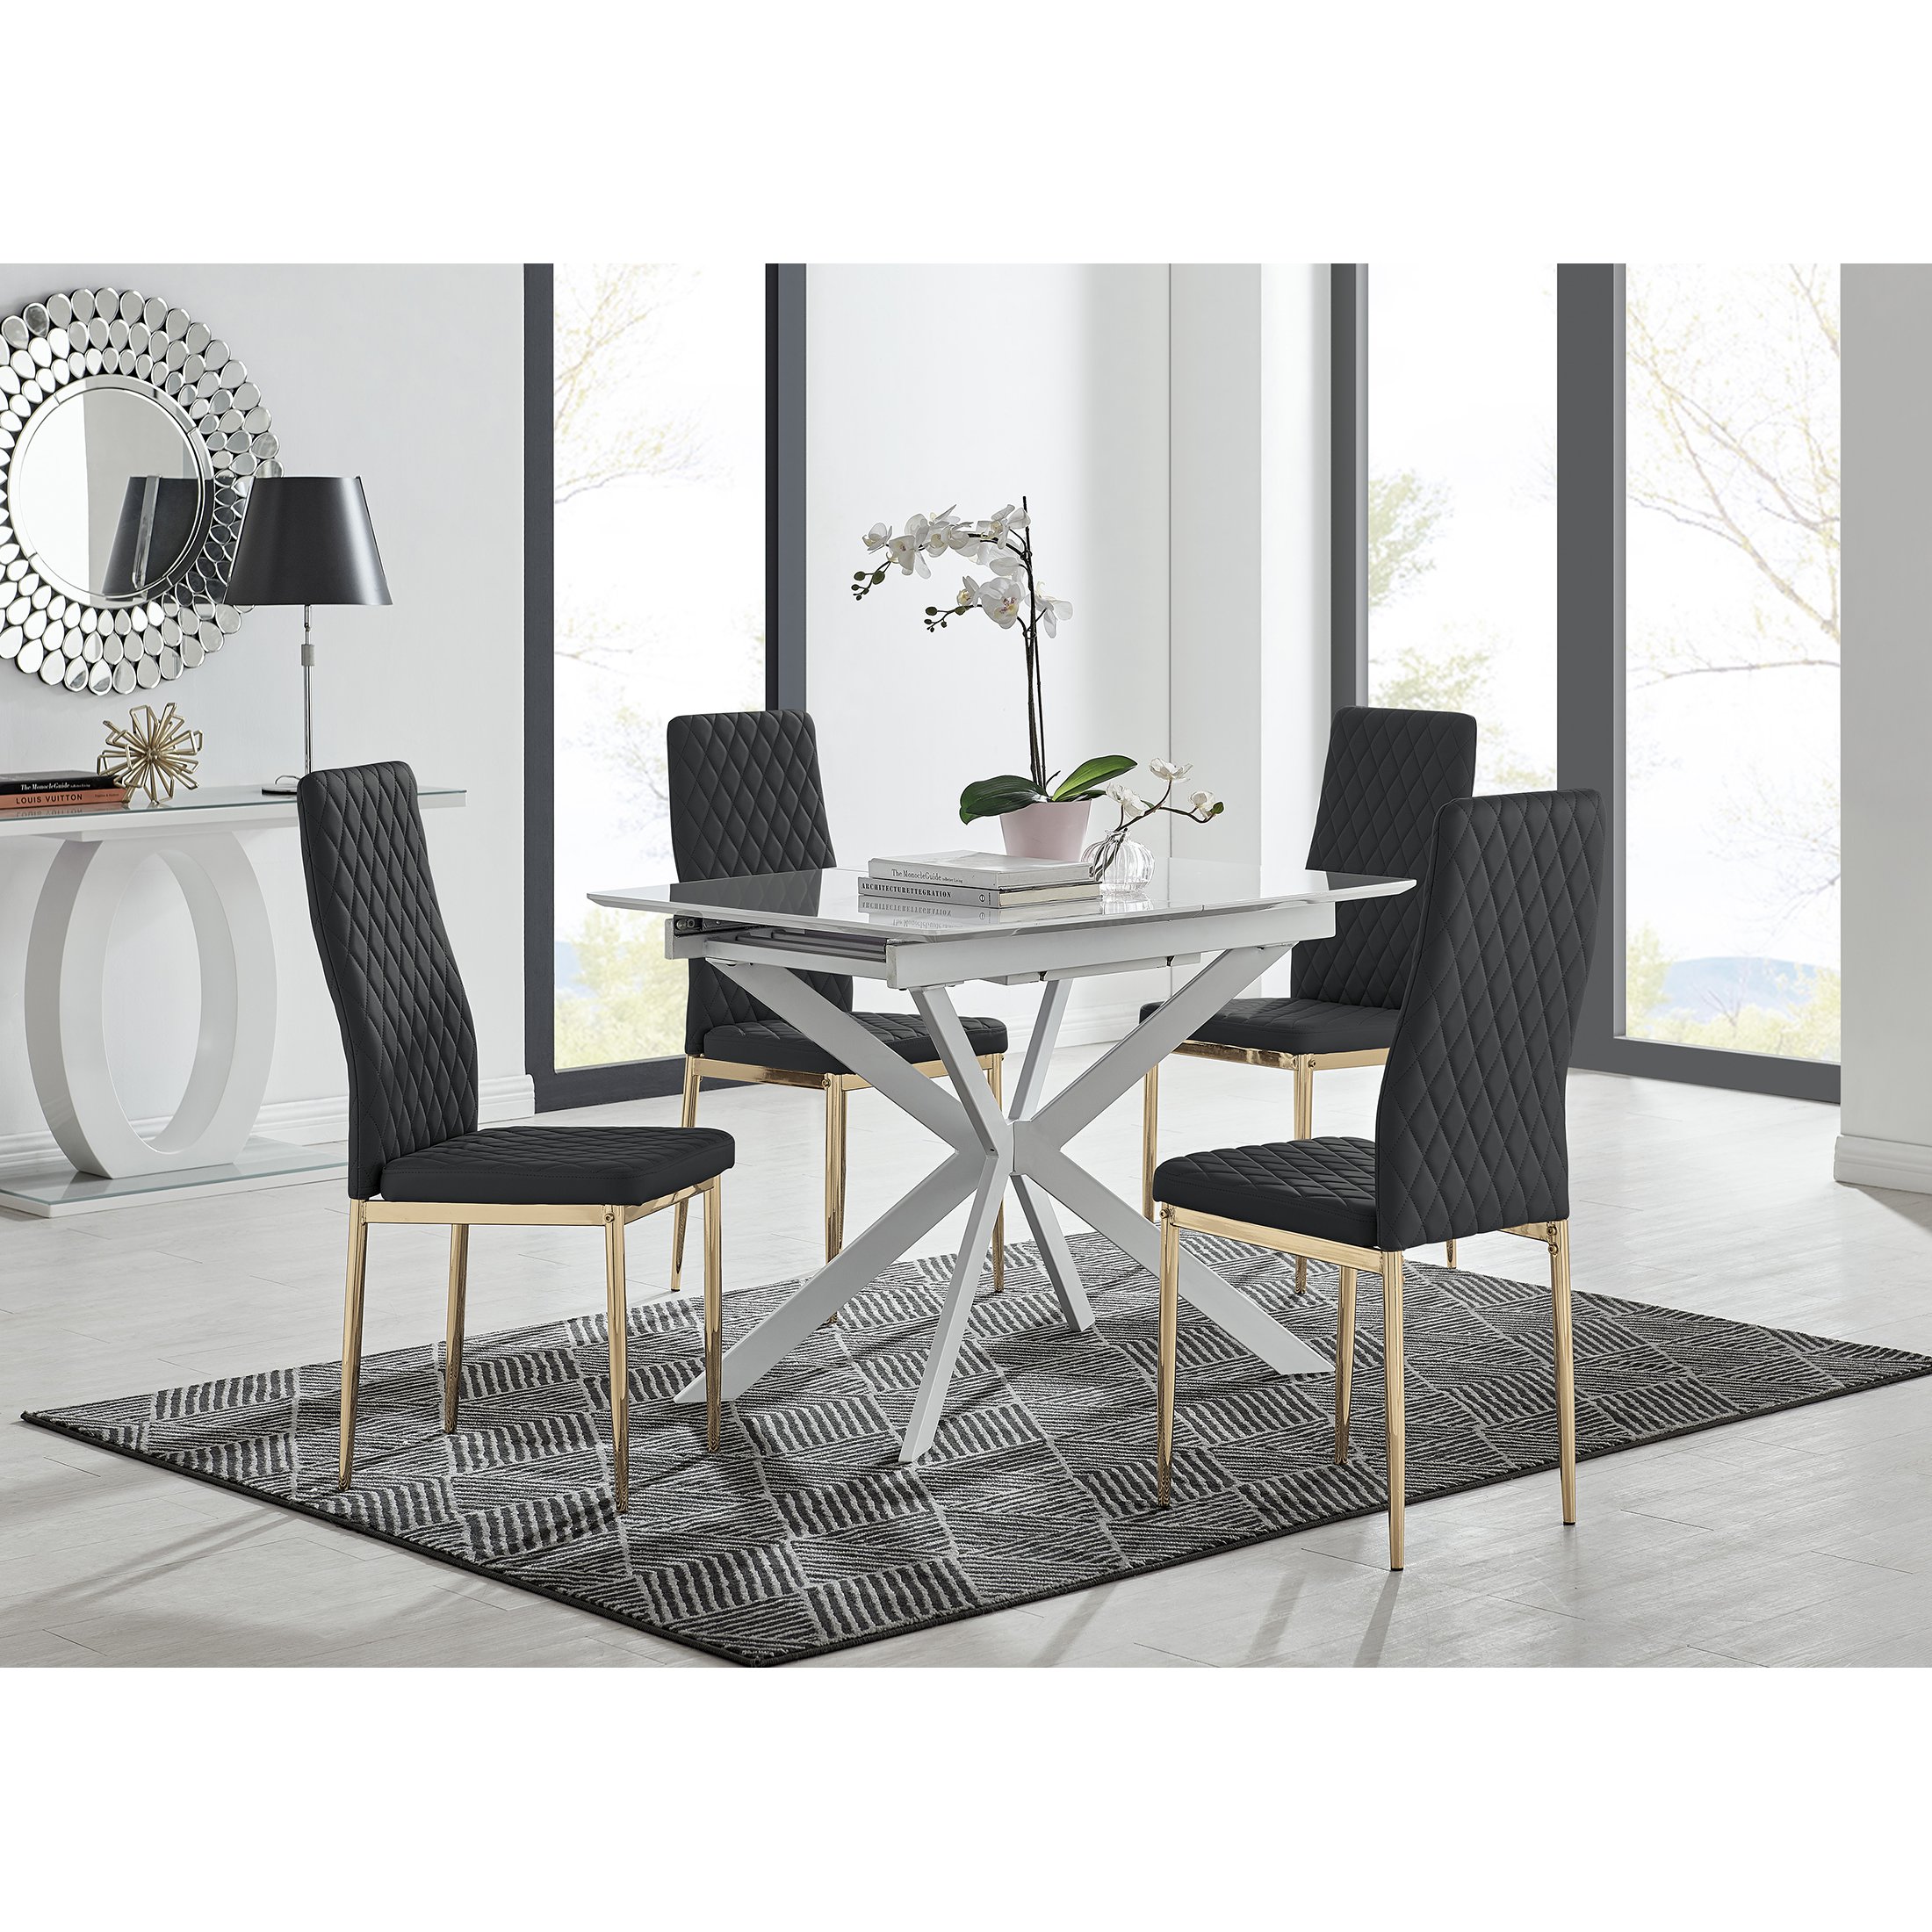 Furniturebox UK Florini V Modern Grey Glass And Chrome Metal Stylish Dining Table And 6 Stylish Milan Dining Chairs Set Dining Table + 6 Cappuccino Milan Chairs